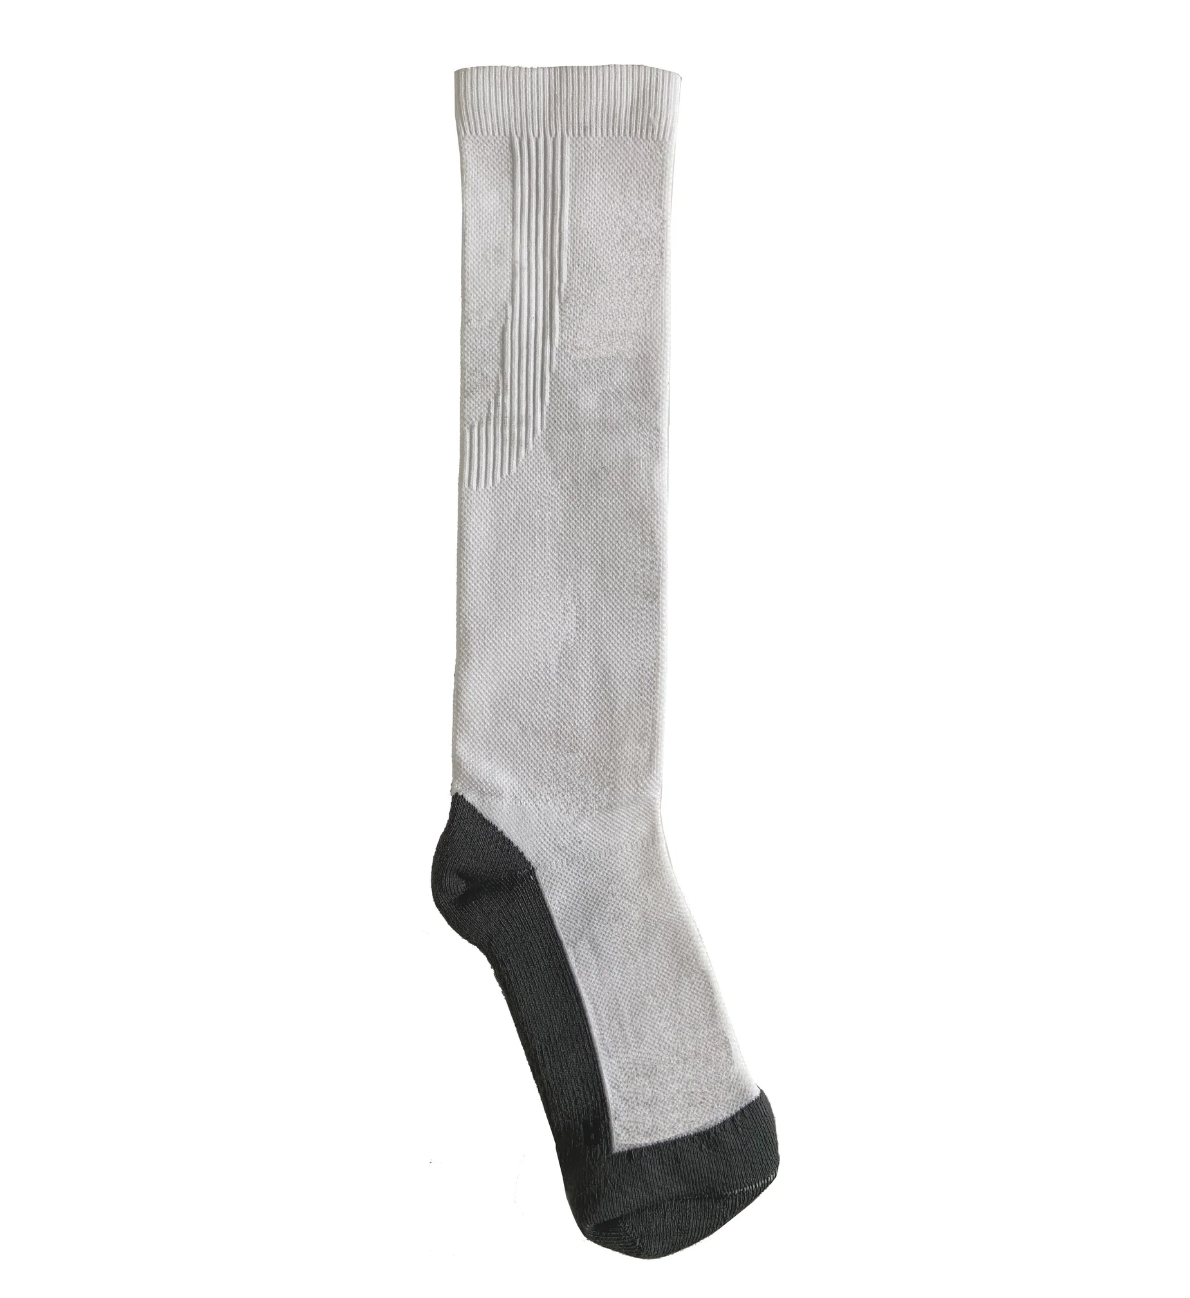 Ultimate Performance Compression Cotton Knee High Socks in Medium - Aussie Made